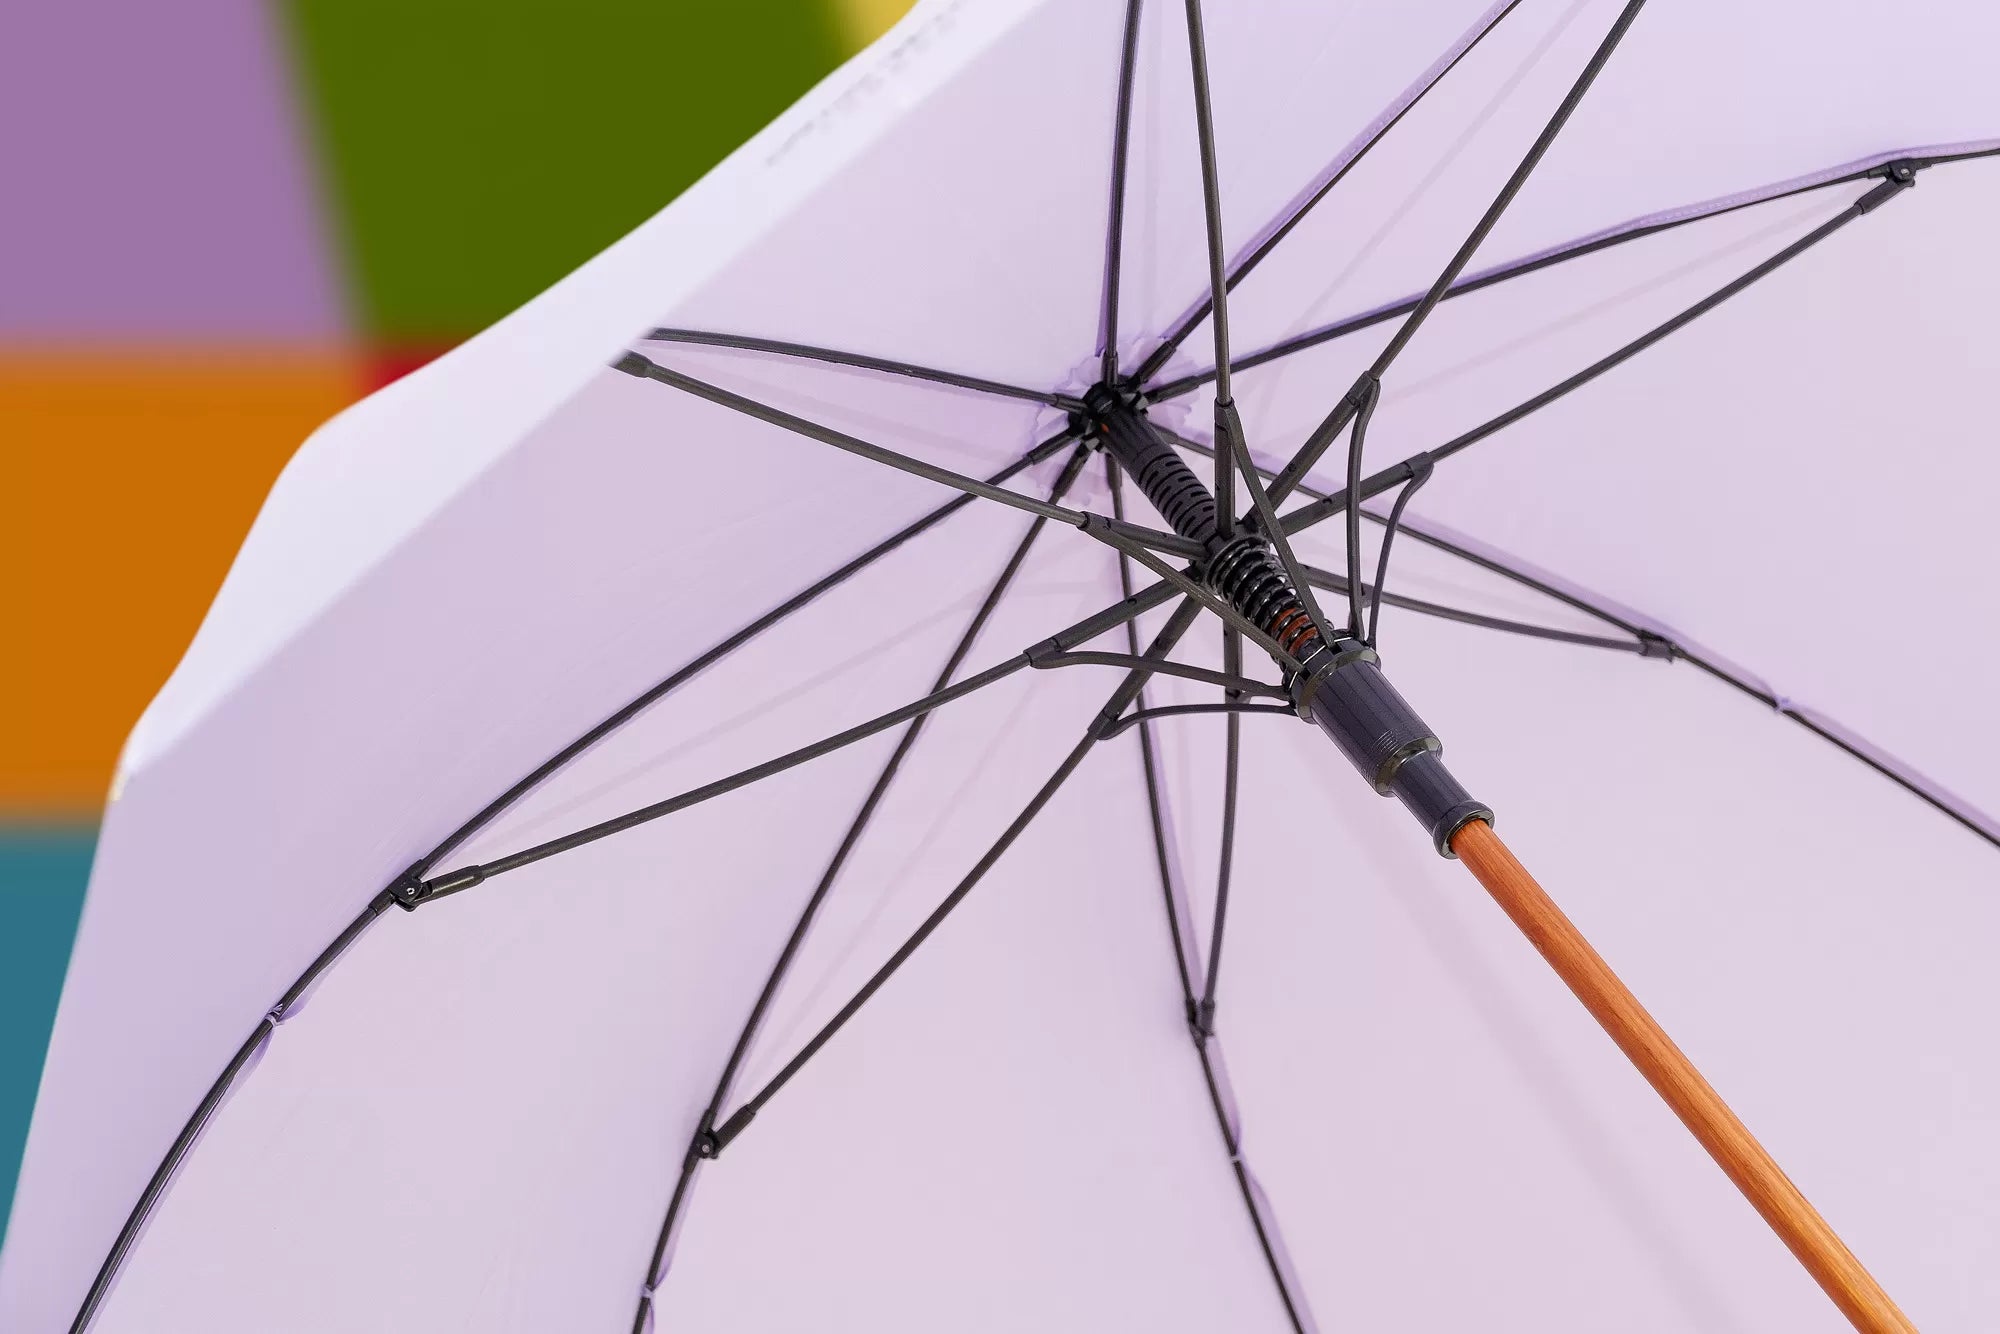 hidewise-london-umbrella-wooden-J-handle-strong-premium-quality-brolly-lilac-gust-proof-automatic-straight-golf-size-professional